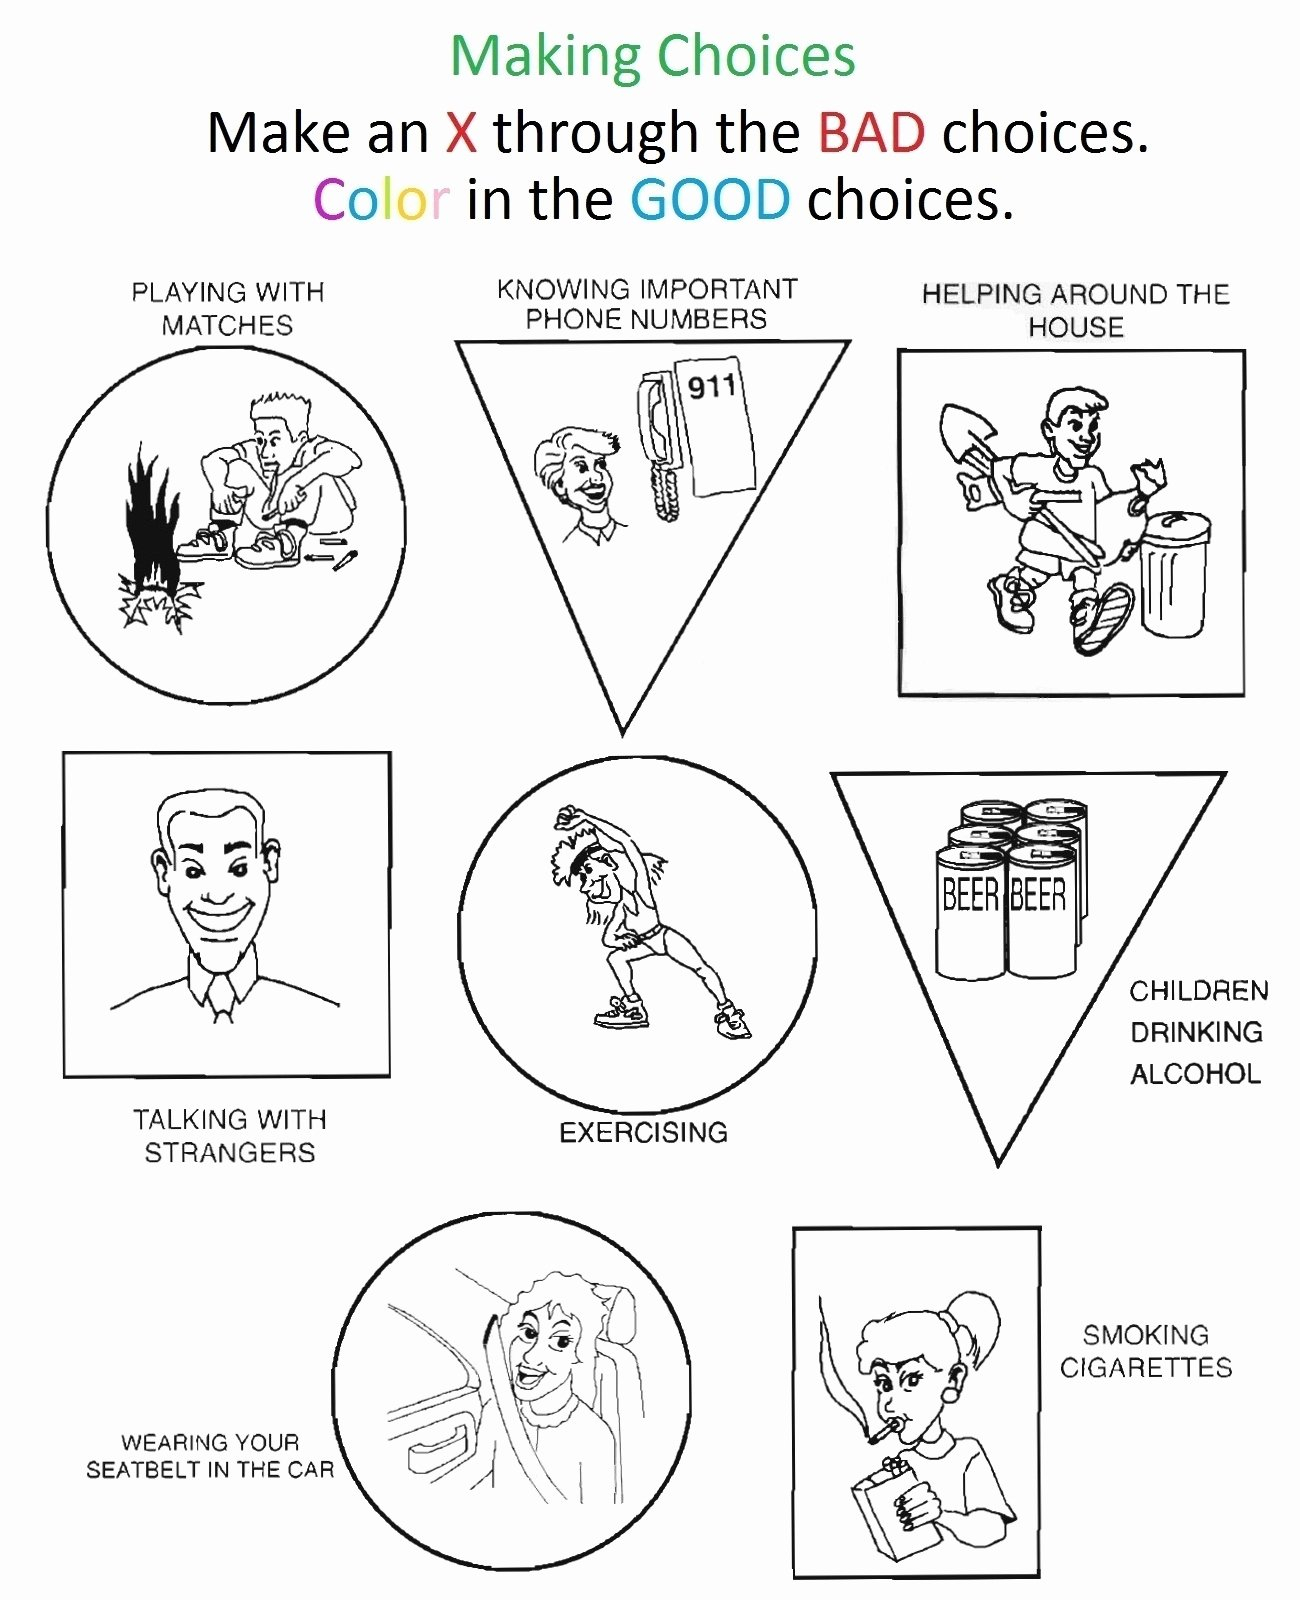 50 Making Good Choices Worksheet Chessmuseum Template 